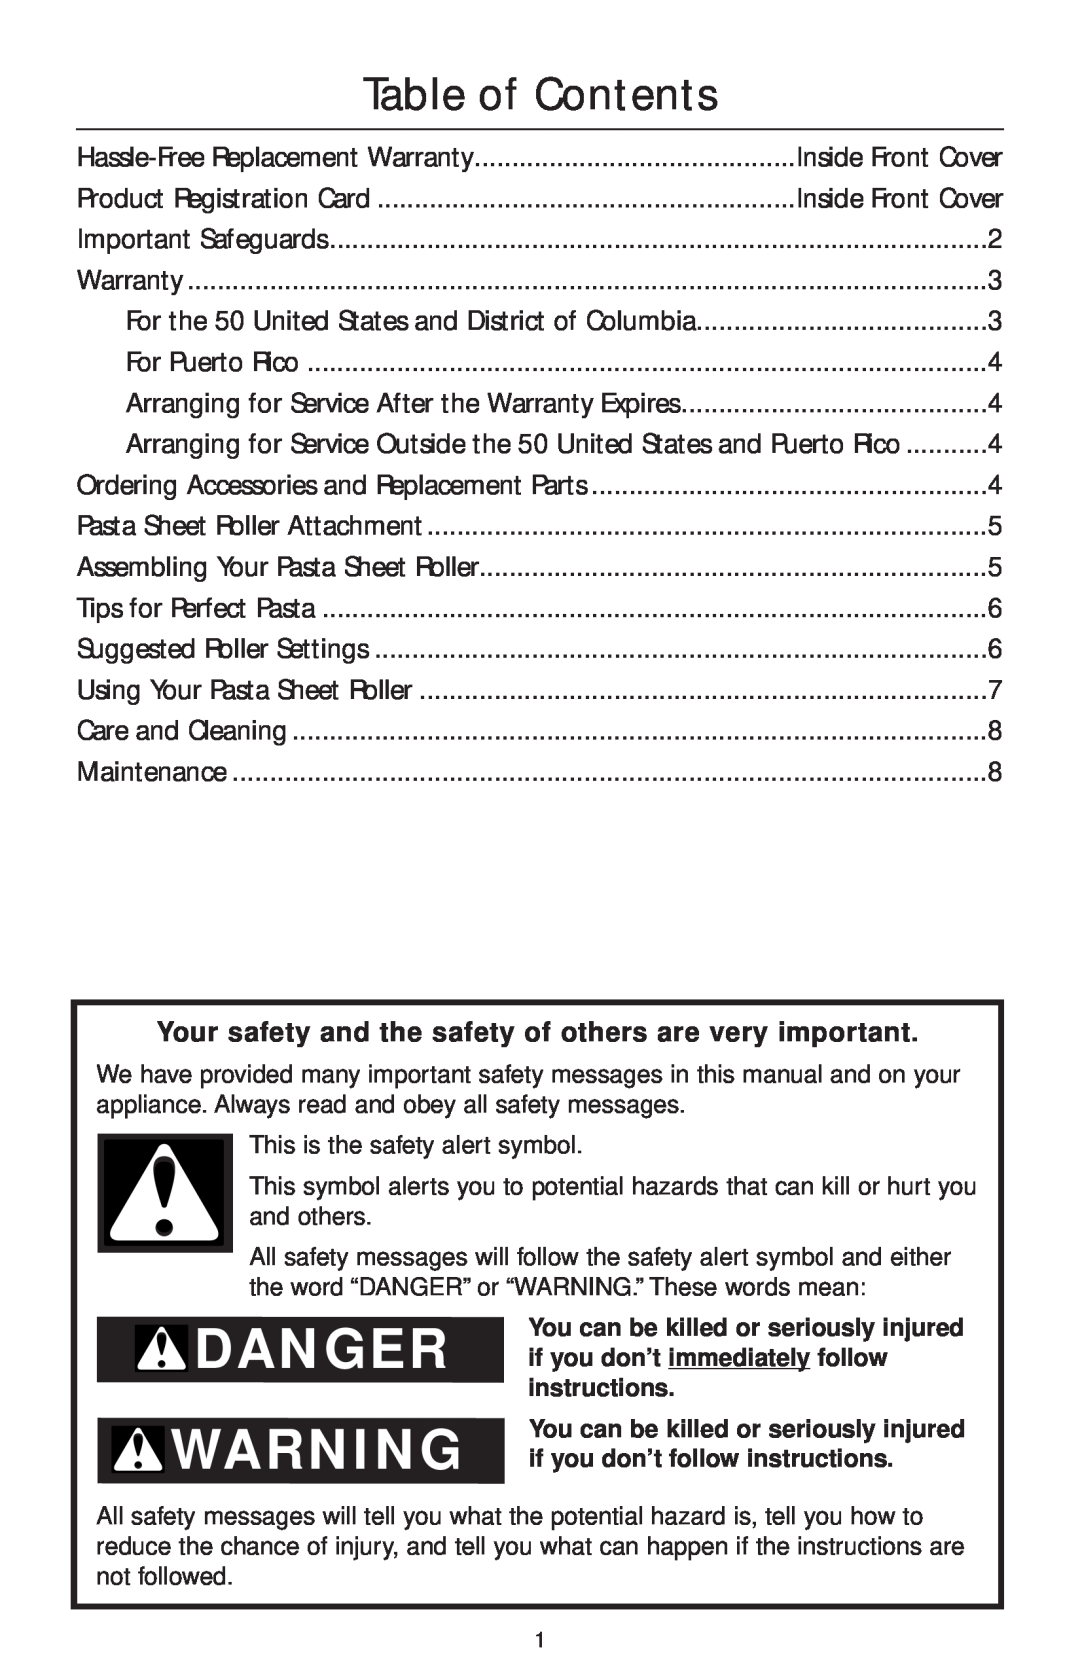 KitchenAid KPSA manual Table of Contents, Your safety and the safety of others are very important 